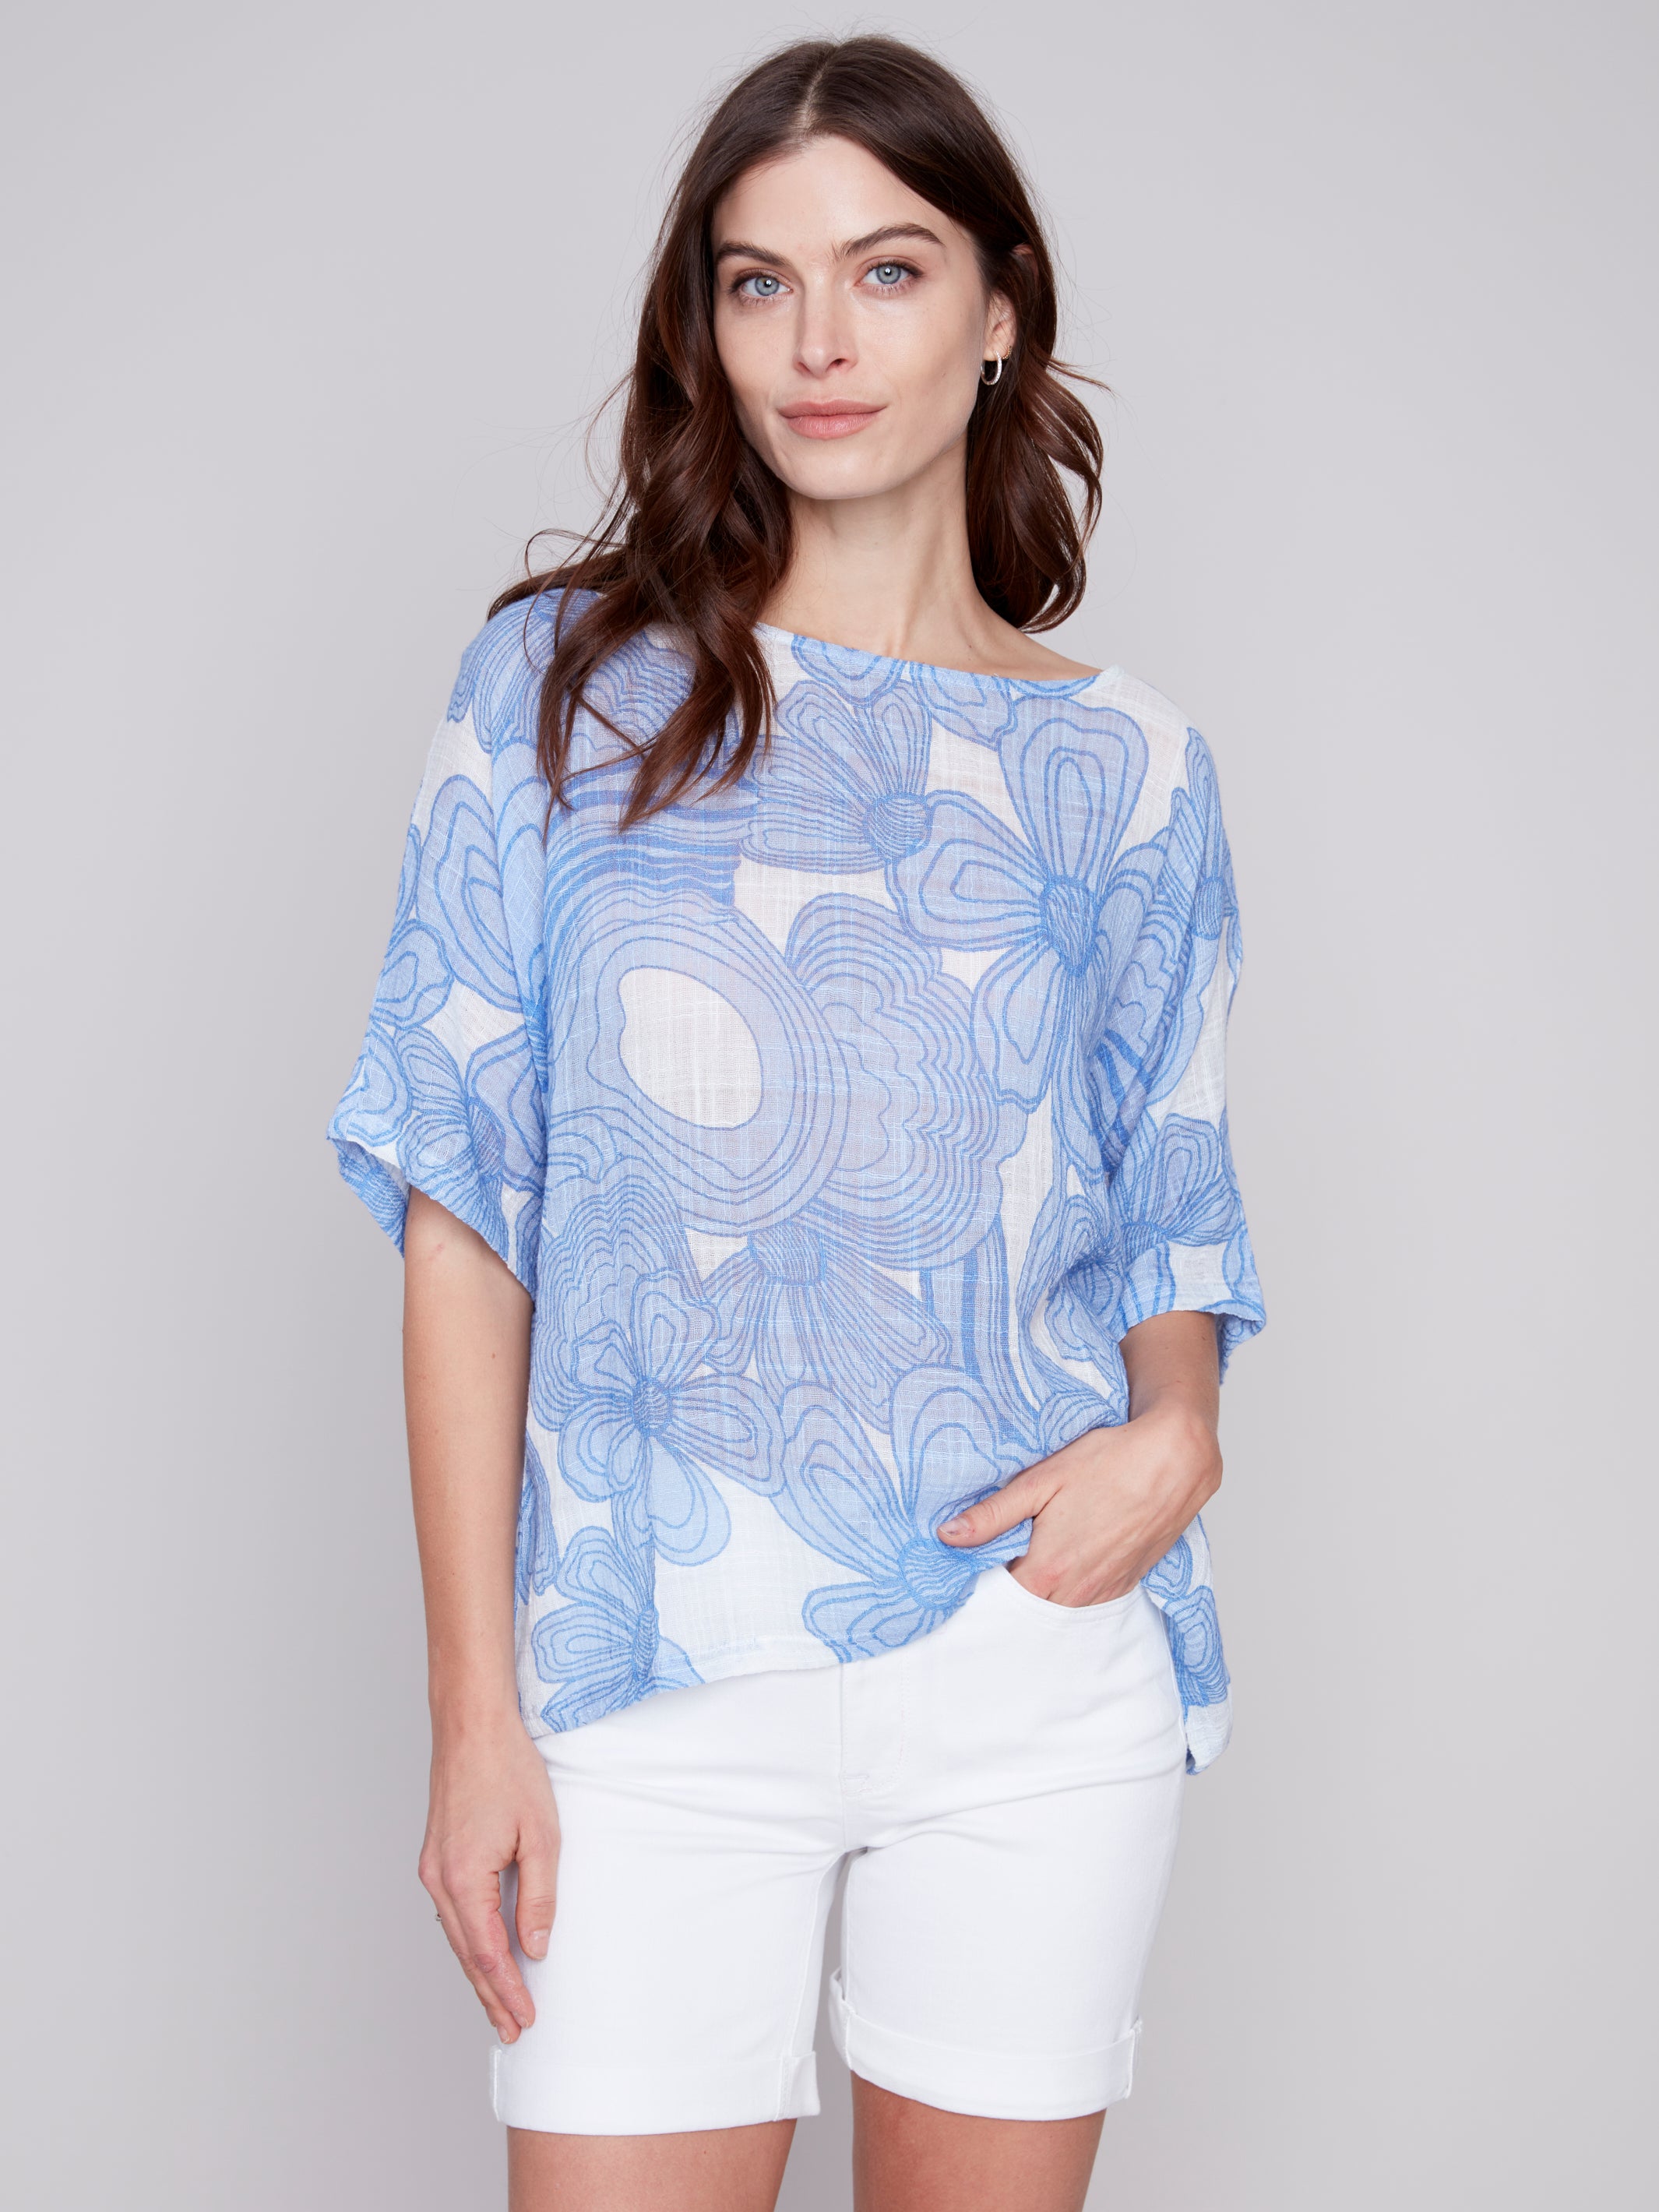 Summer Blossoms Gauze Top by Charlie B